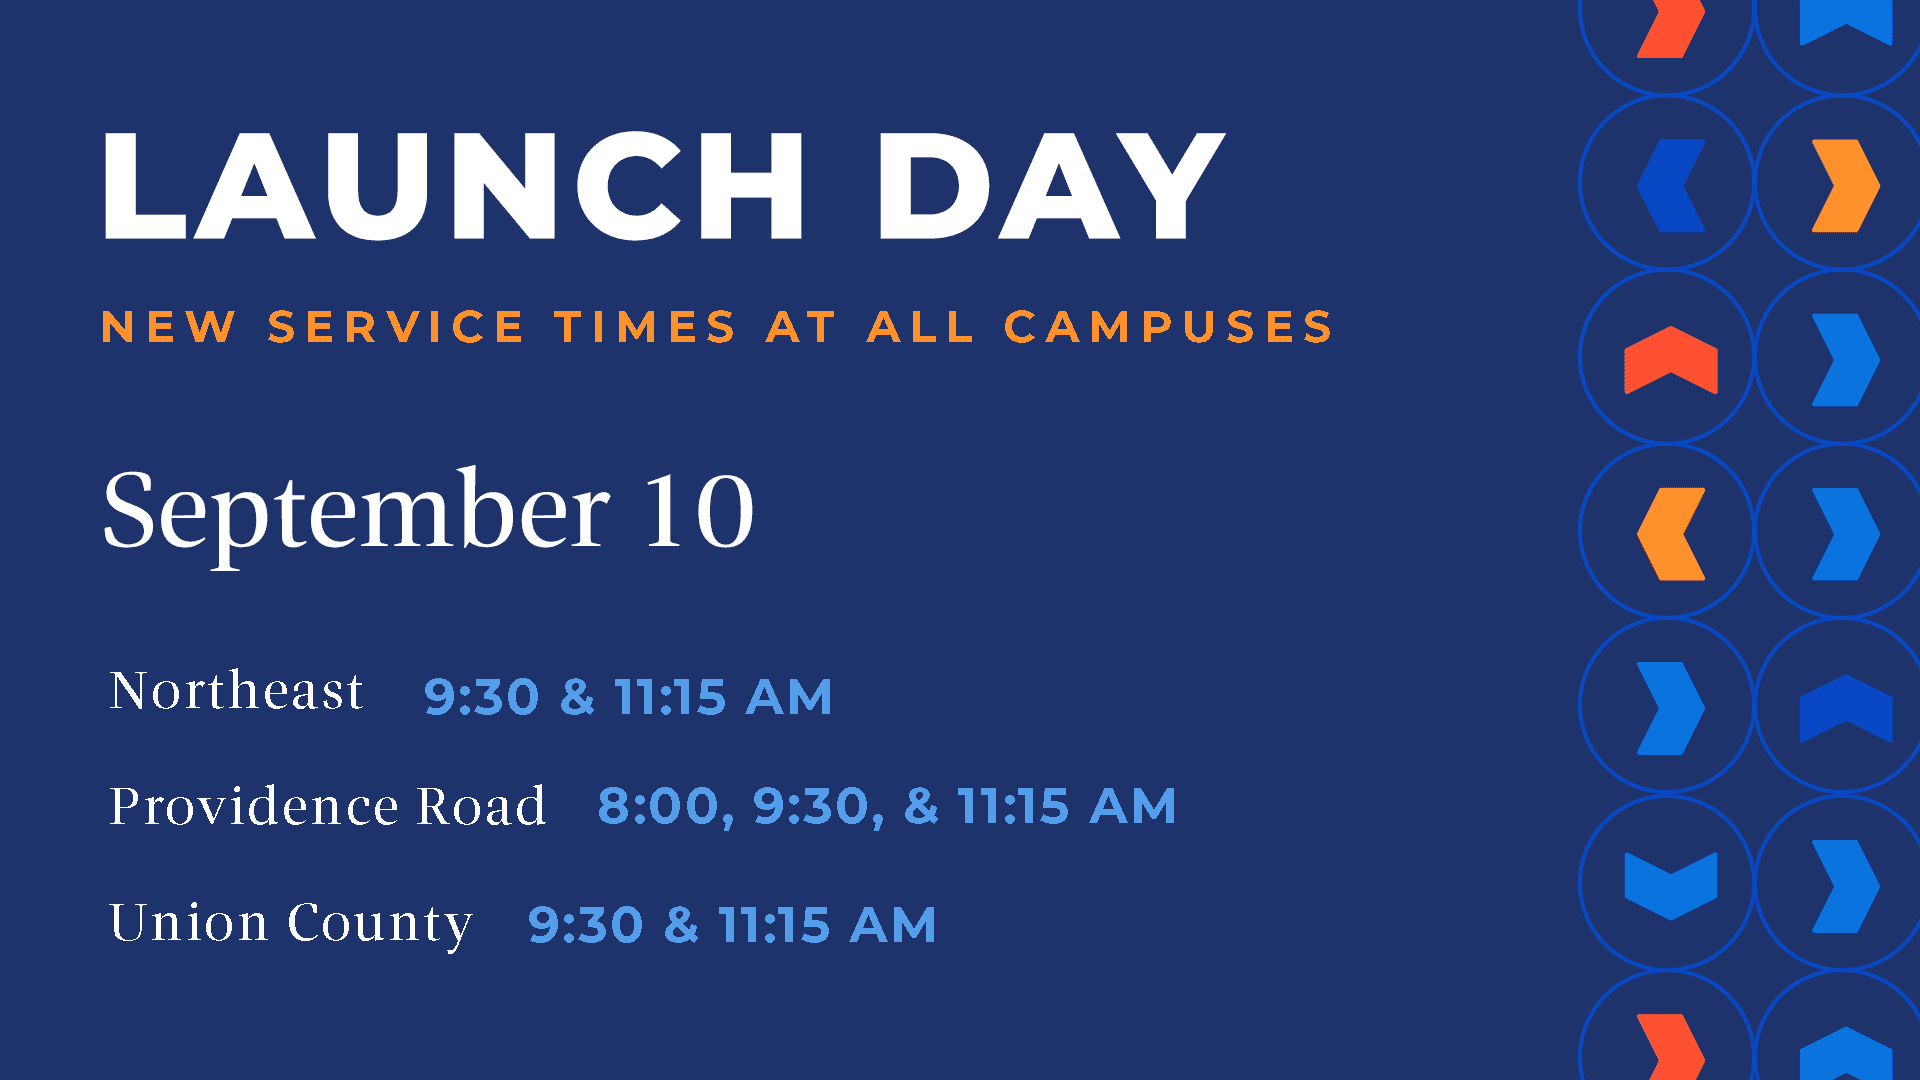 Launch Day Correct Times - Launch Day